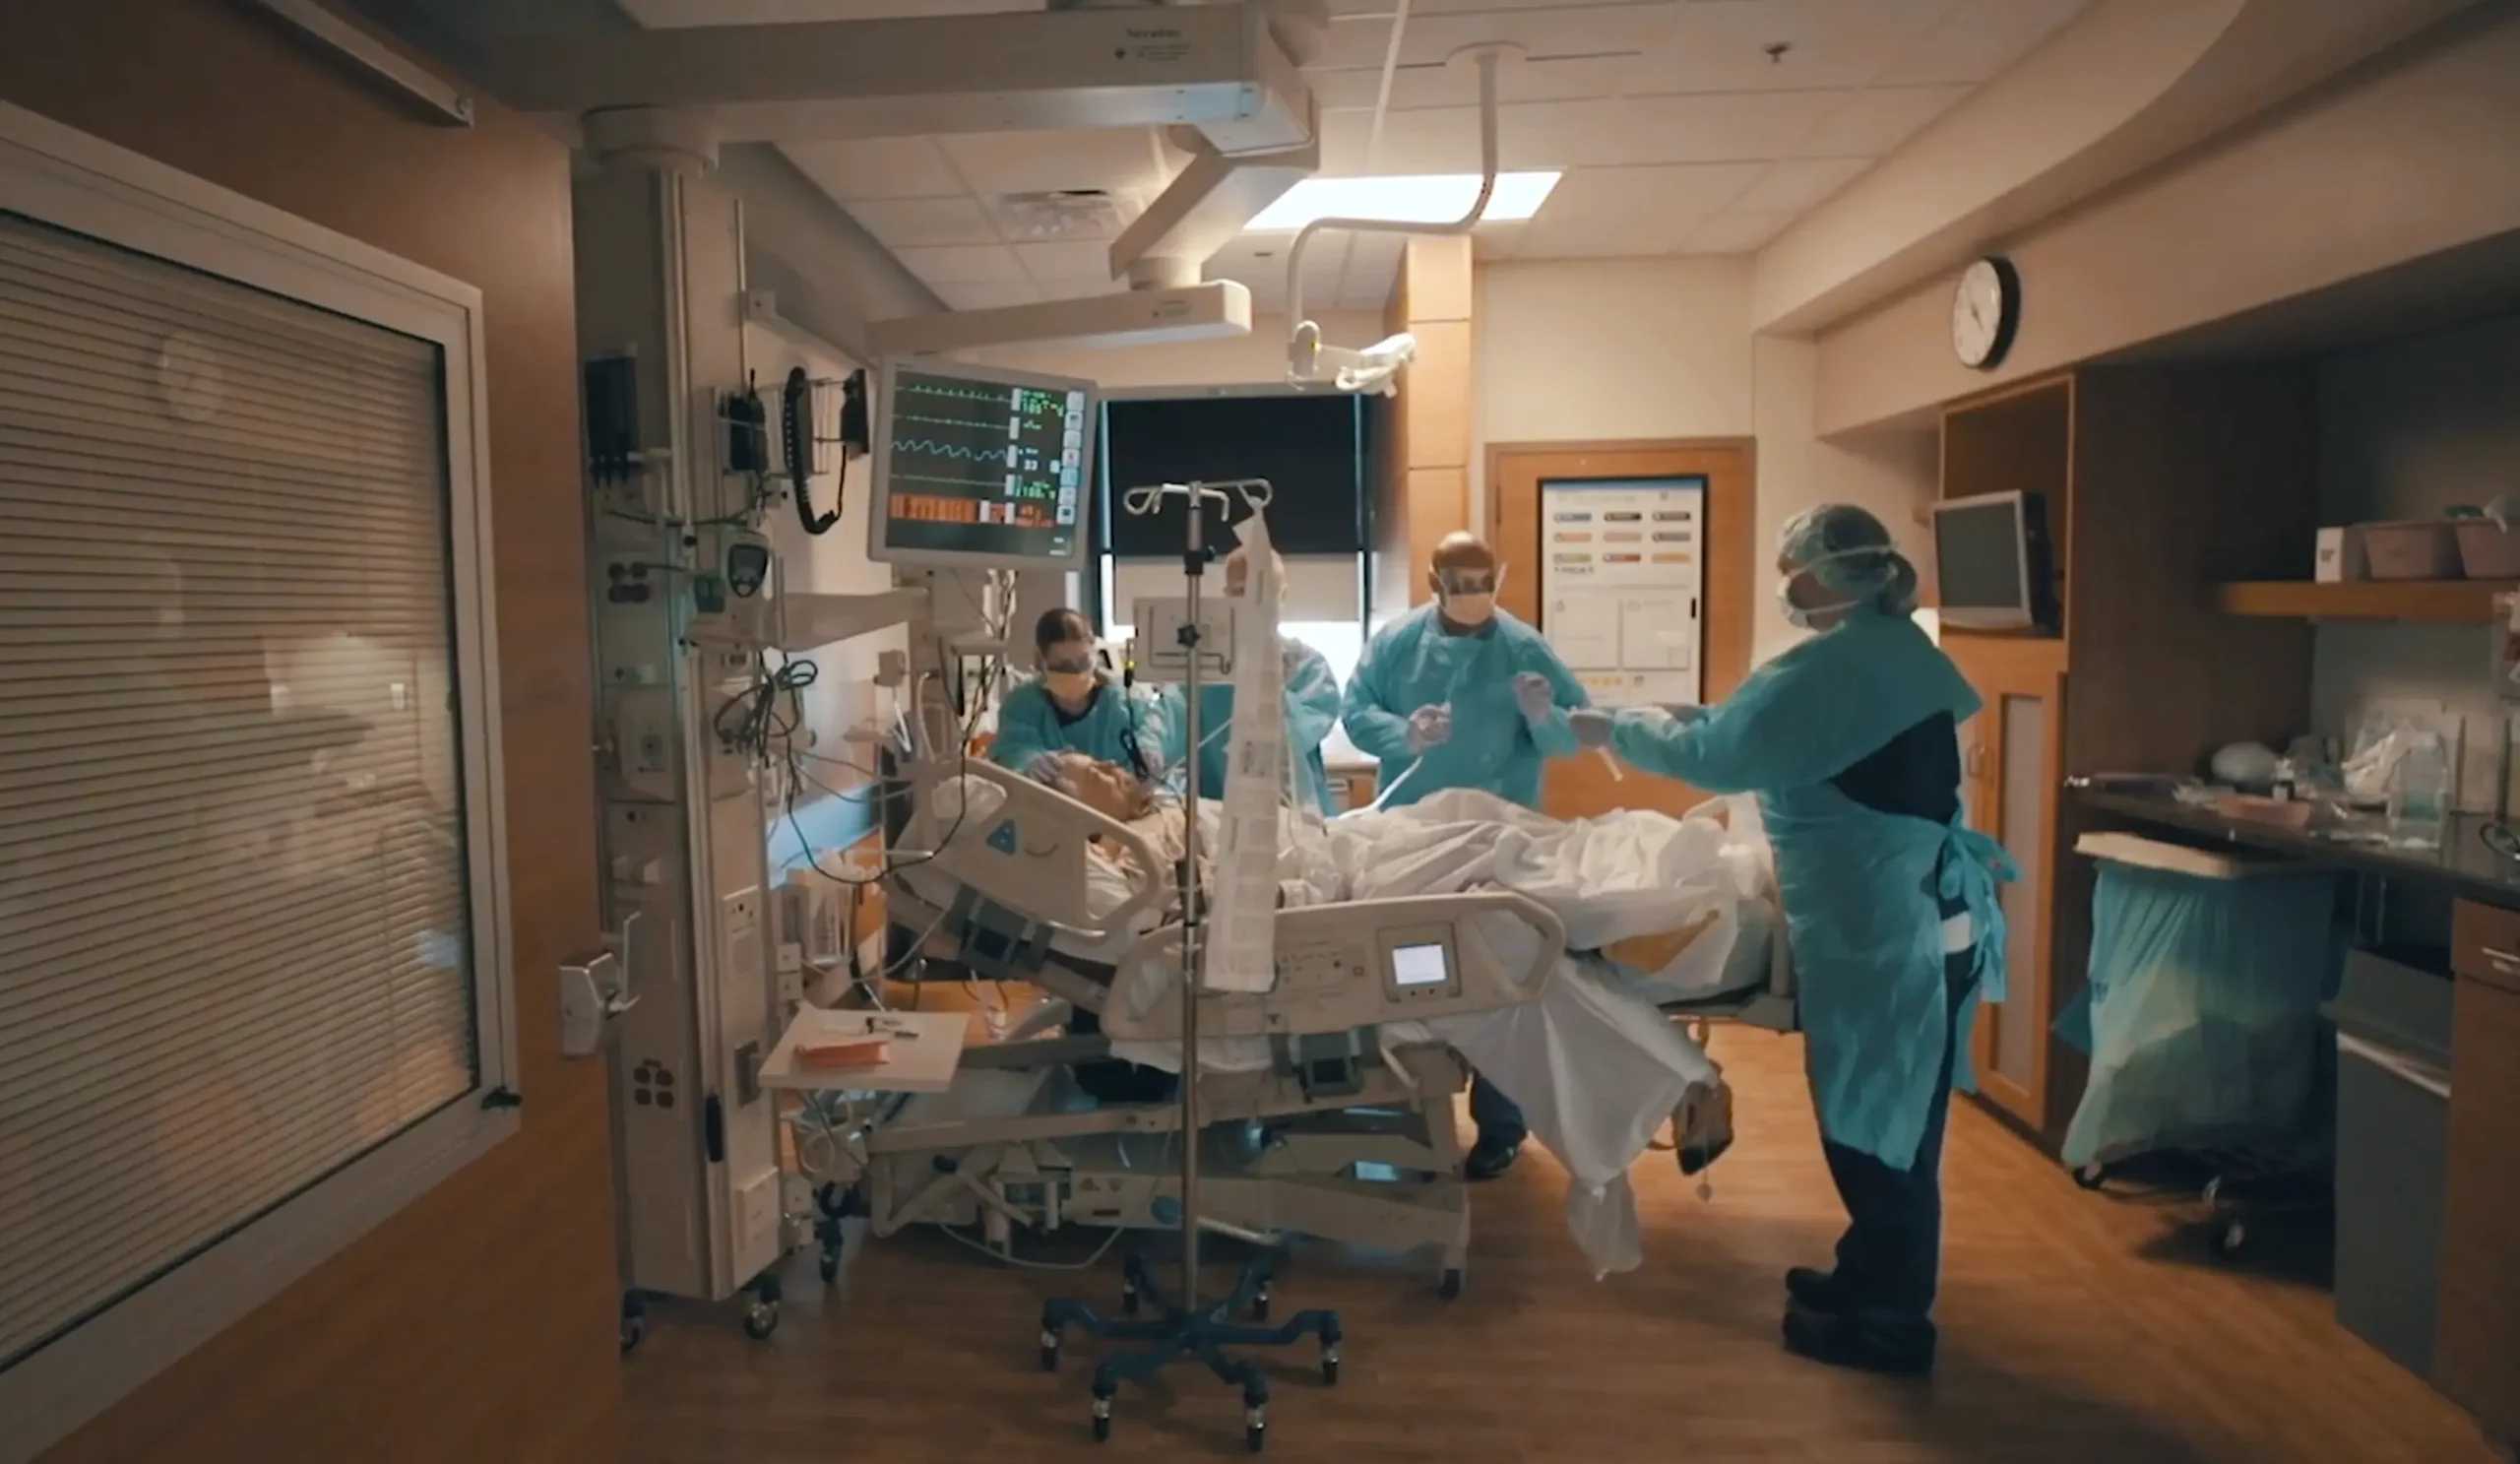 Behind the scenes of a healthcare video production set in an operation room.